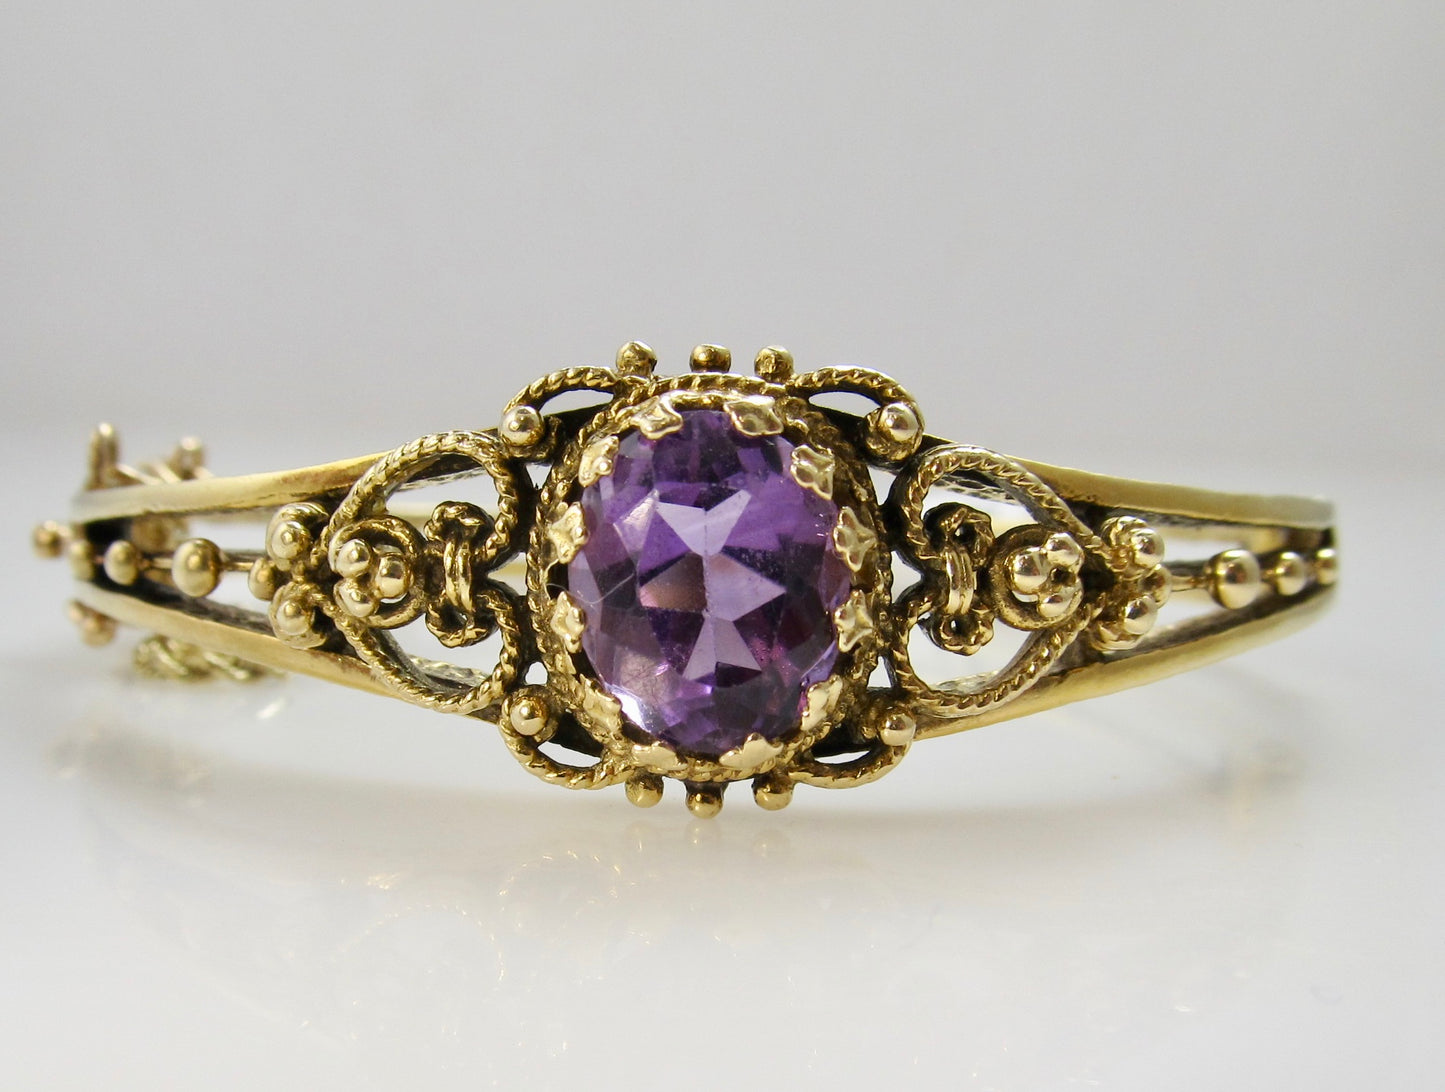 Victorious Cape May, antique jewelry, amethyst bracelet